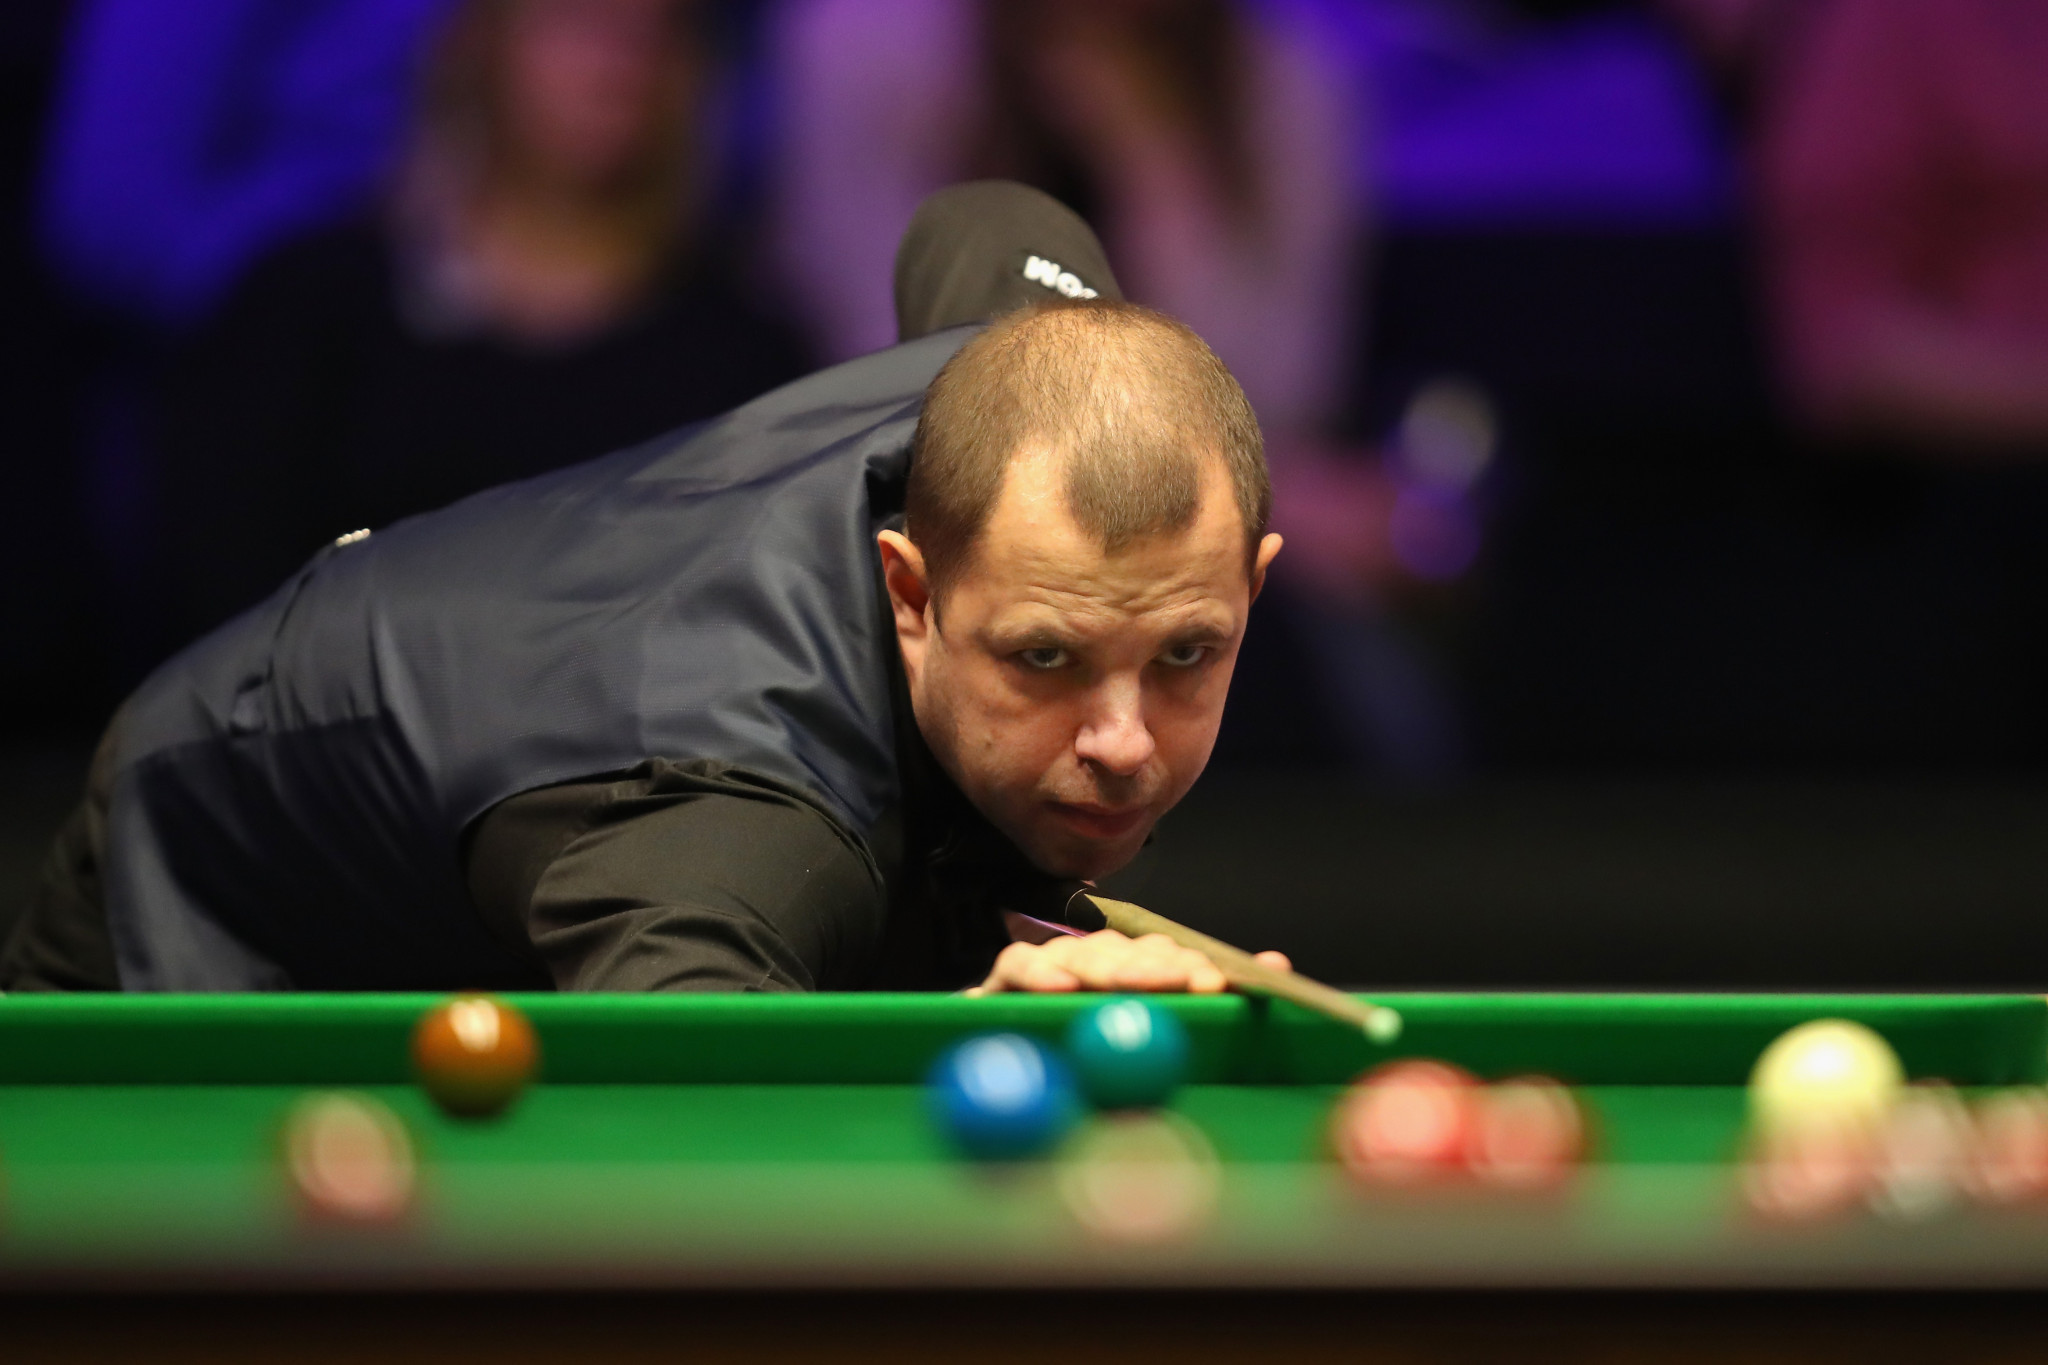 Barry Hawkins reached the World Snooker Championship final in 2013 ©Getty Images